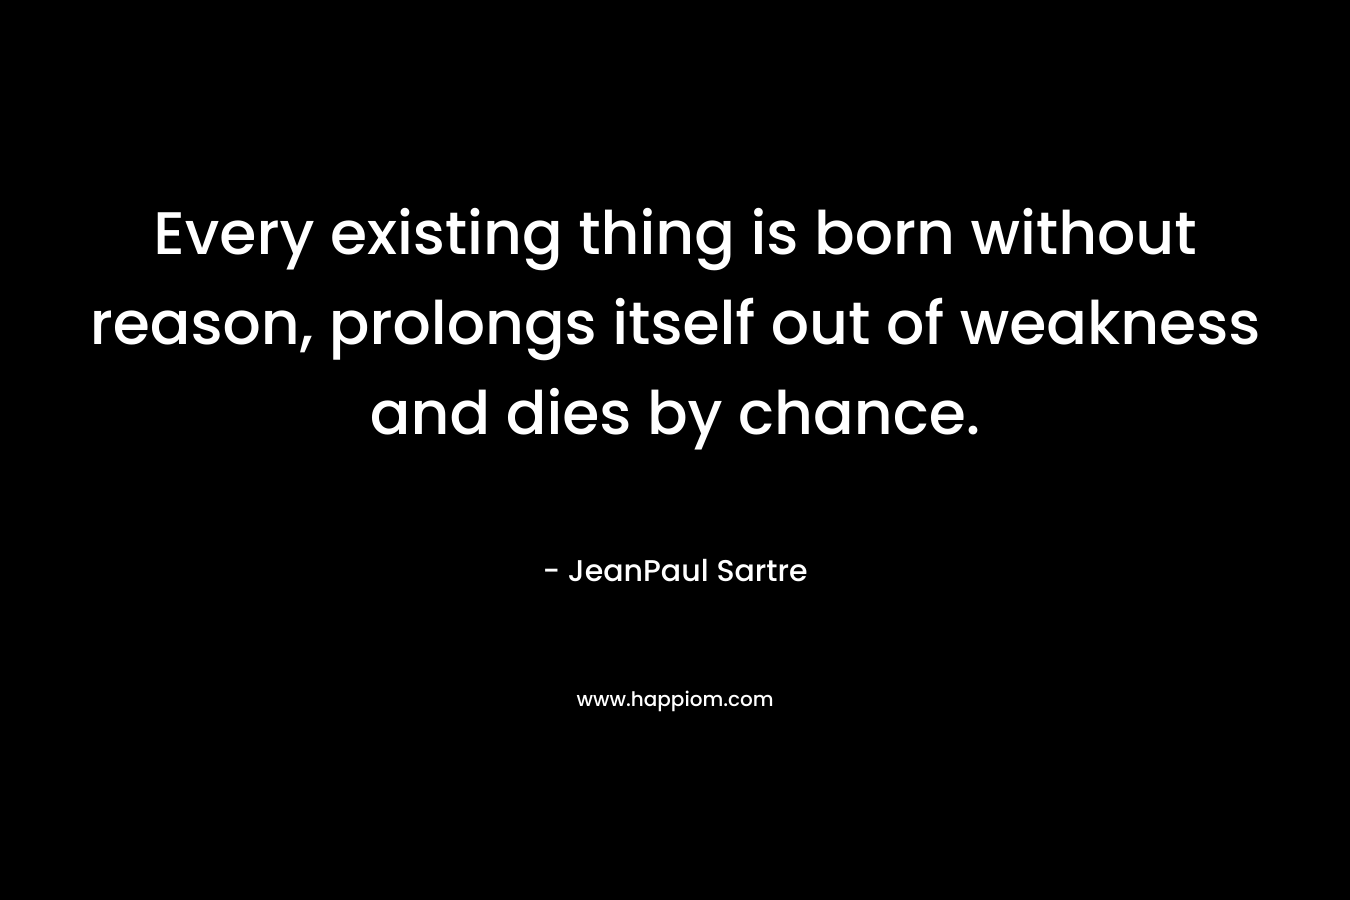 Every existing thing is born without reason, prolongs itself out of weakness and dies by chance.